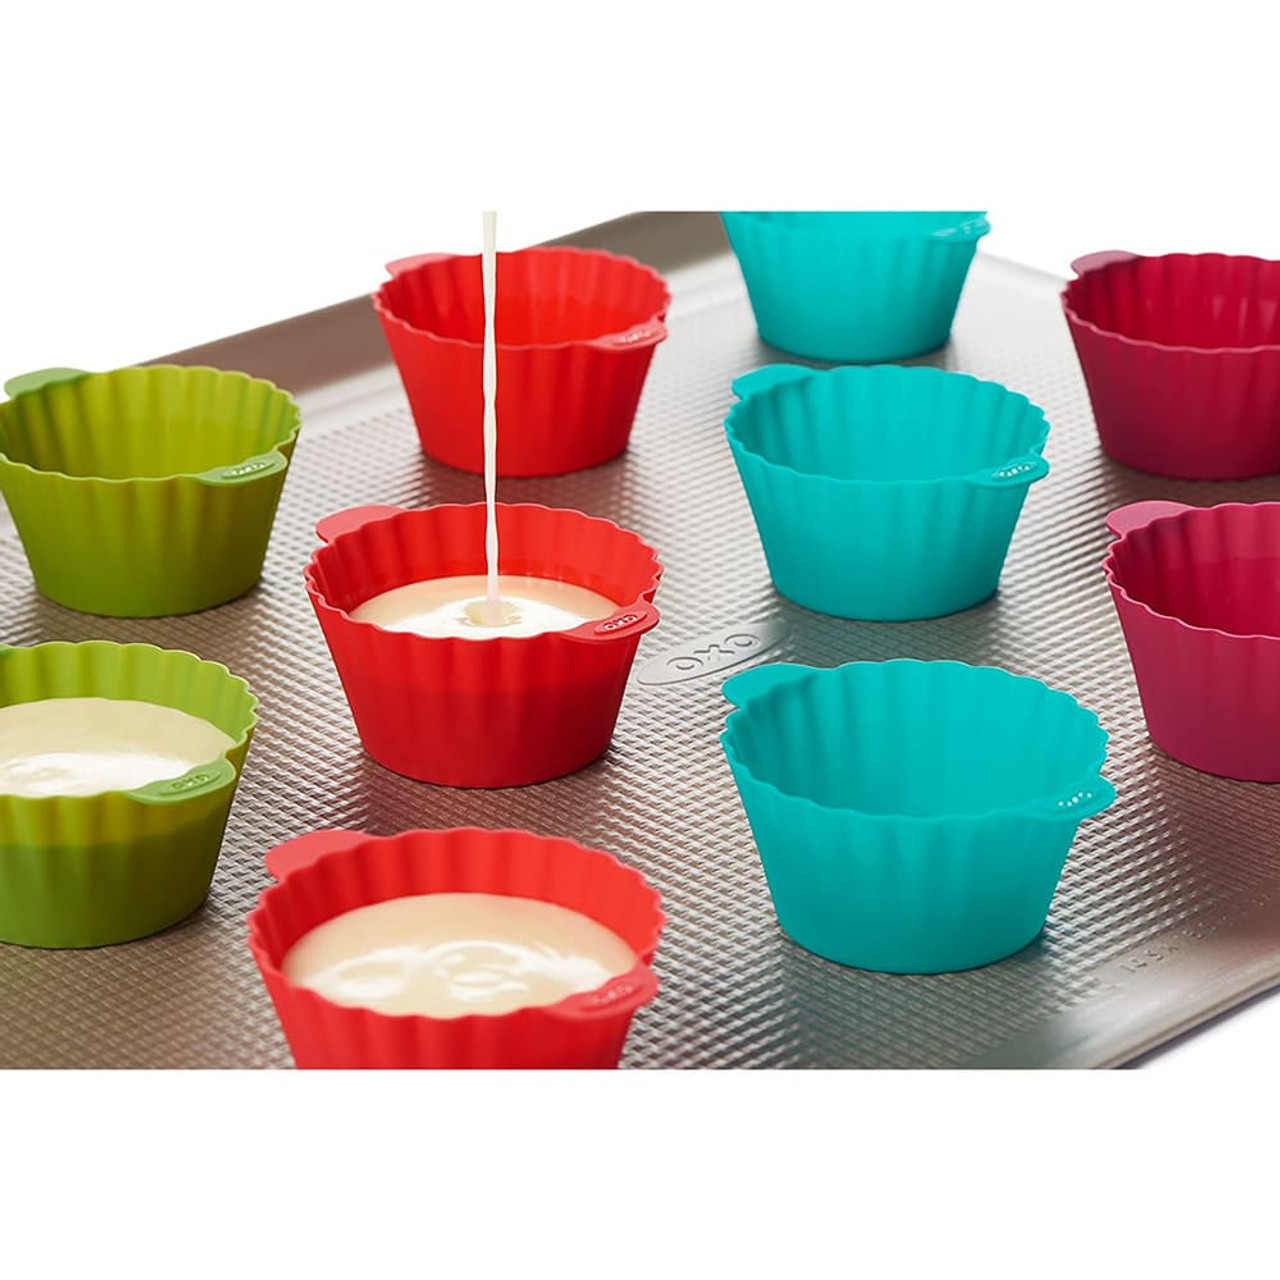 https://cdn11.bigcommerce.com/s-hccytny0od/images/stencil/1280x1280/products/4005/14686/oxo-good-grips-silicone-baking-cups-5__61857.1618142839.jpg?c=2?imbypass=on